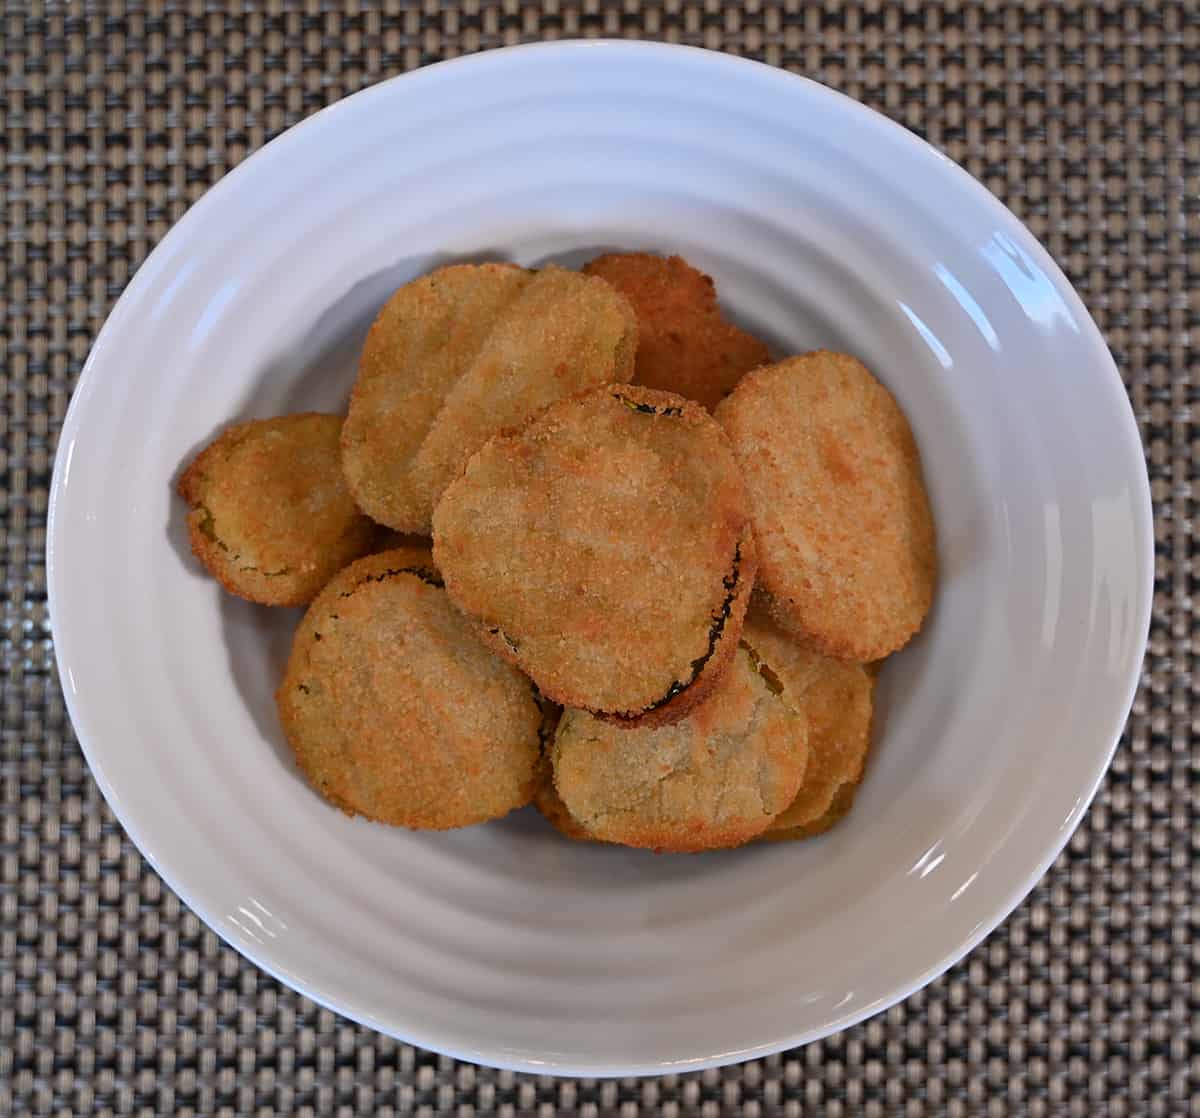 Top down of the breaded dill pickle chips cooked and served in a white bowl.